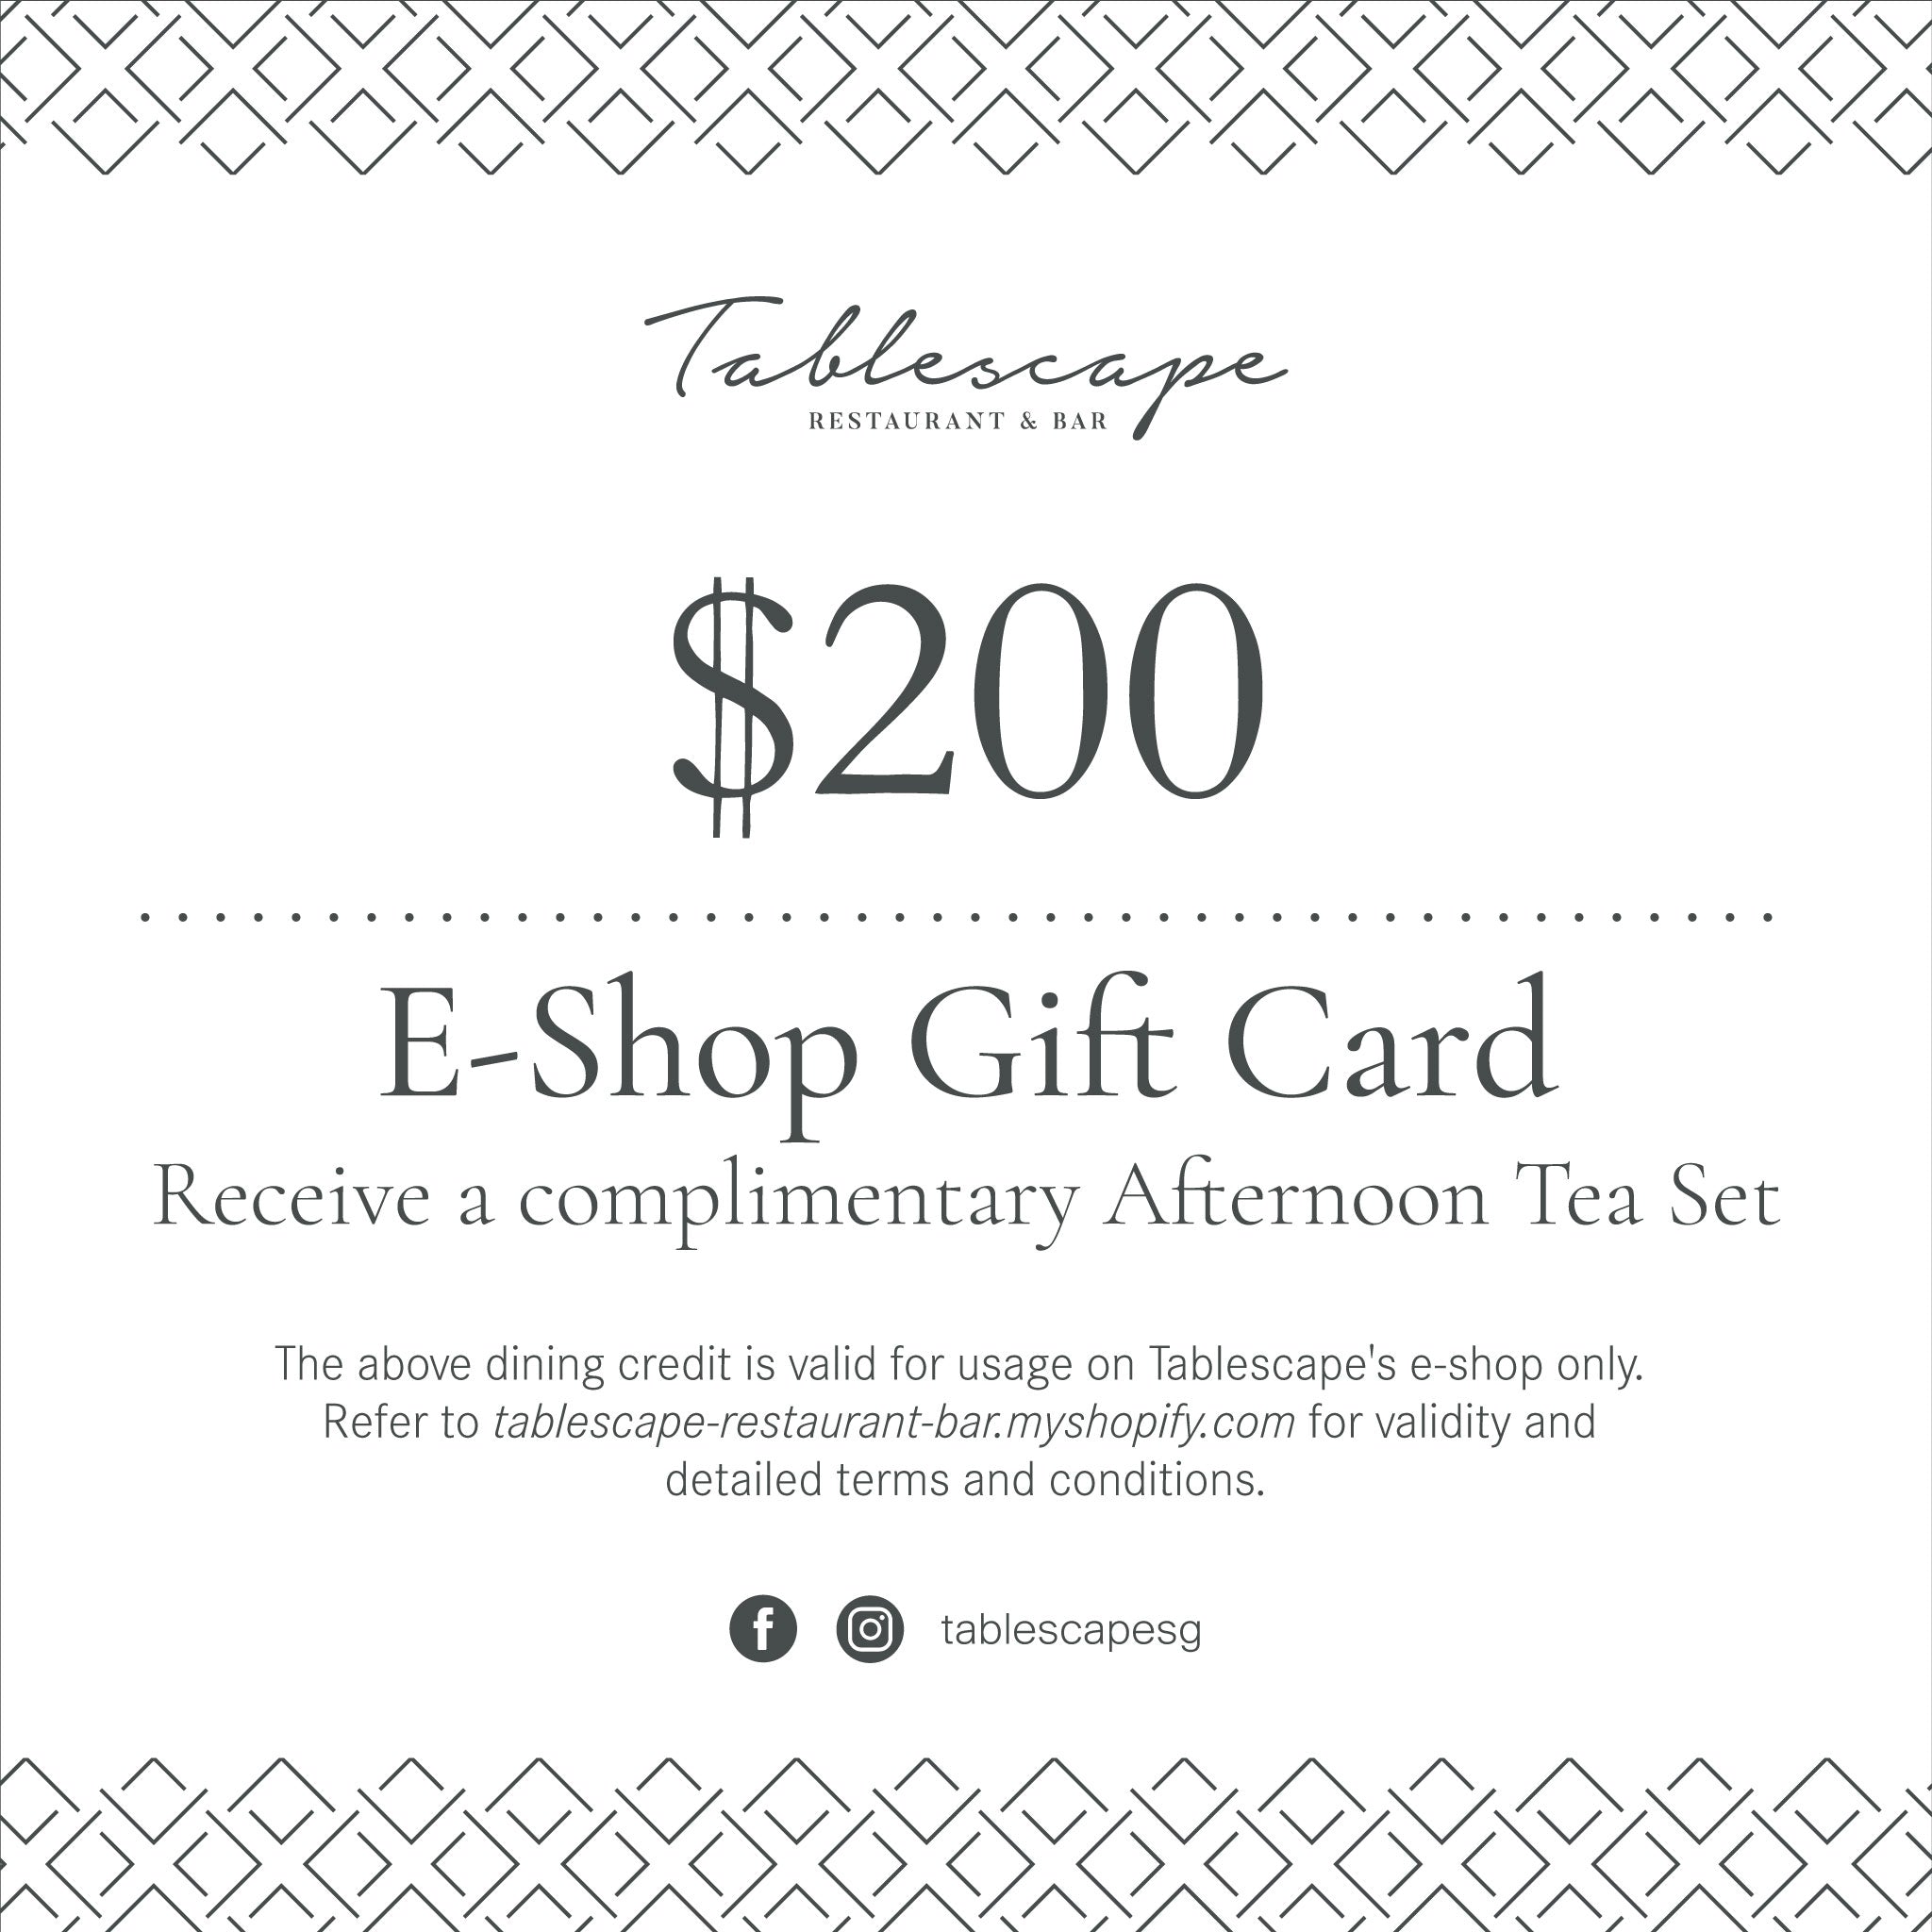 $200 E-Shop Gift Card - Receive a complimentary Afternoon Tea Set